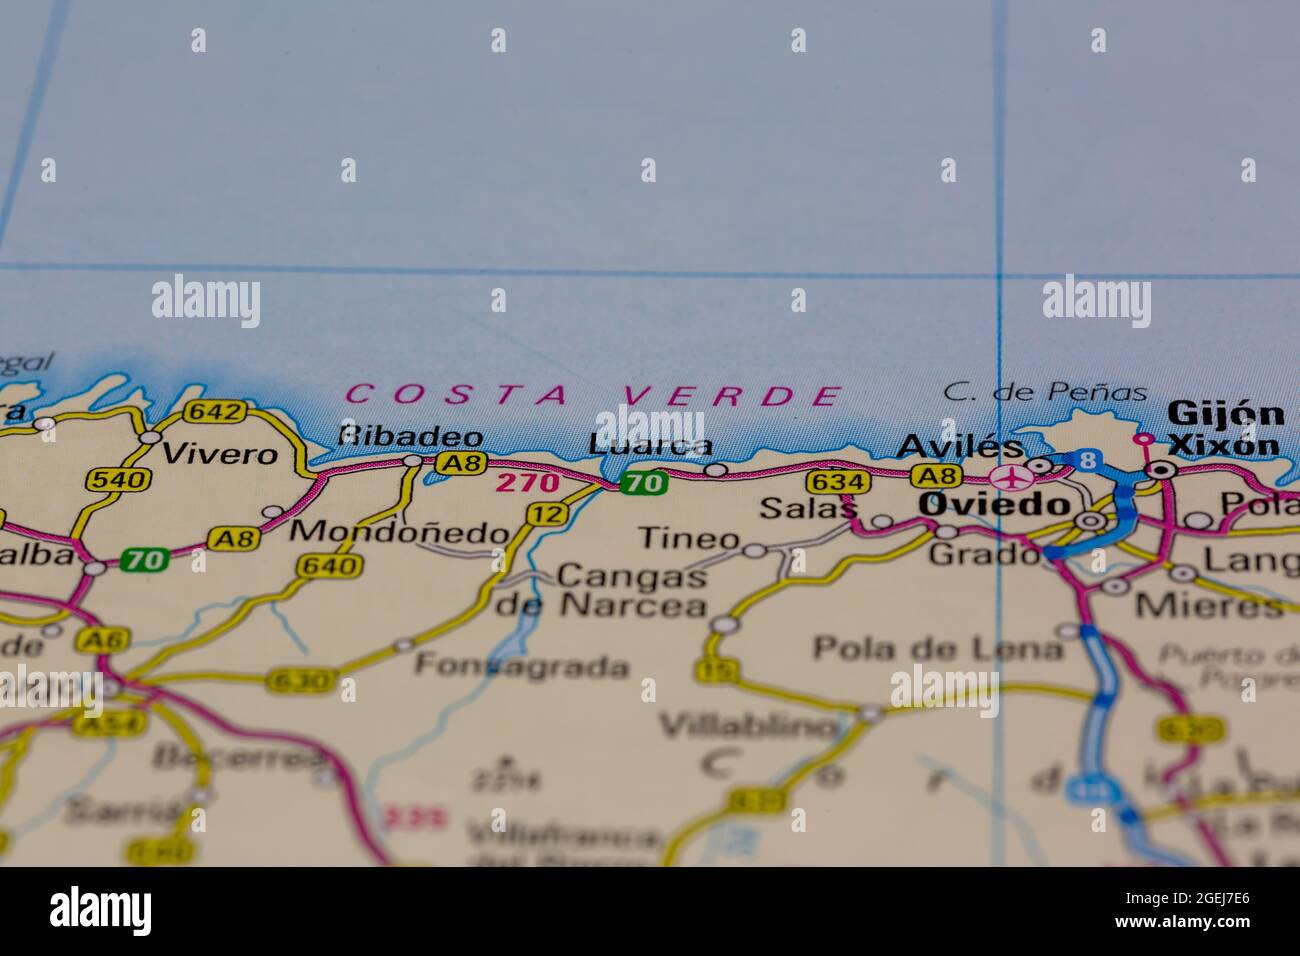 Luarca Spain shown on a road map or Geography map Stock Photo